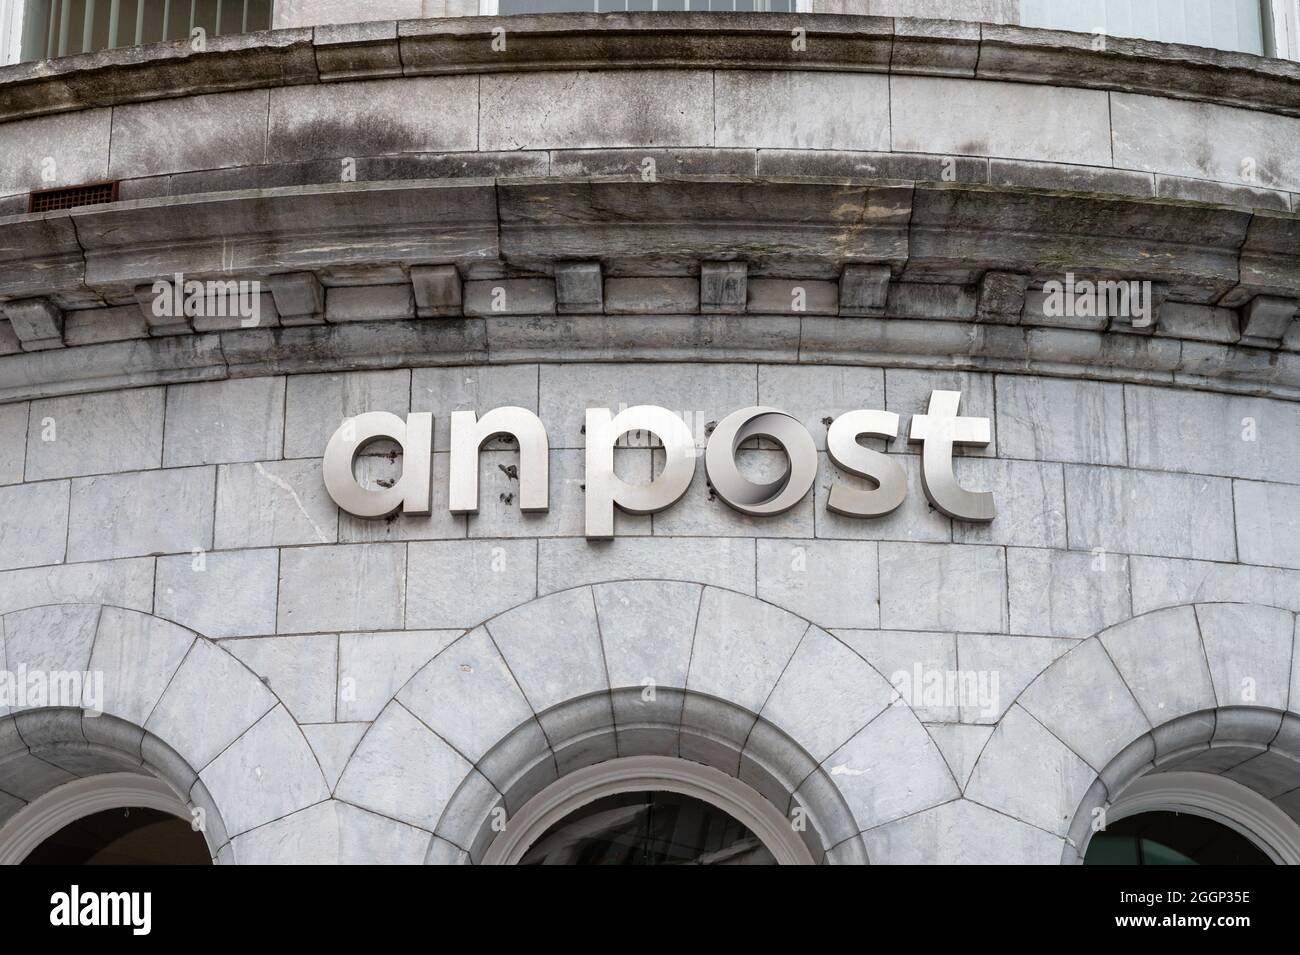 Cork, Ireland- July 14, 2021: The sign for An Post in Cork city Stock Photo